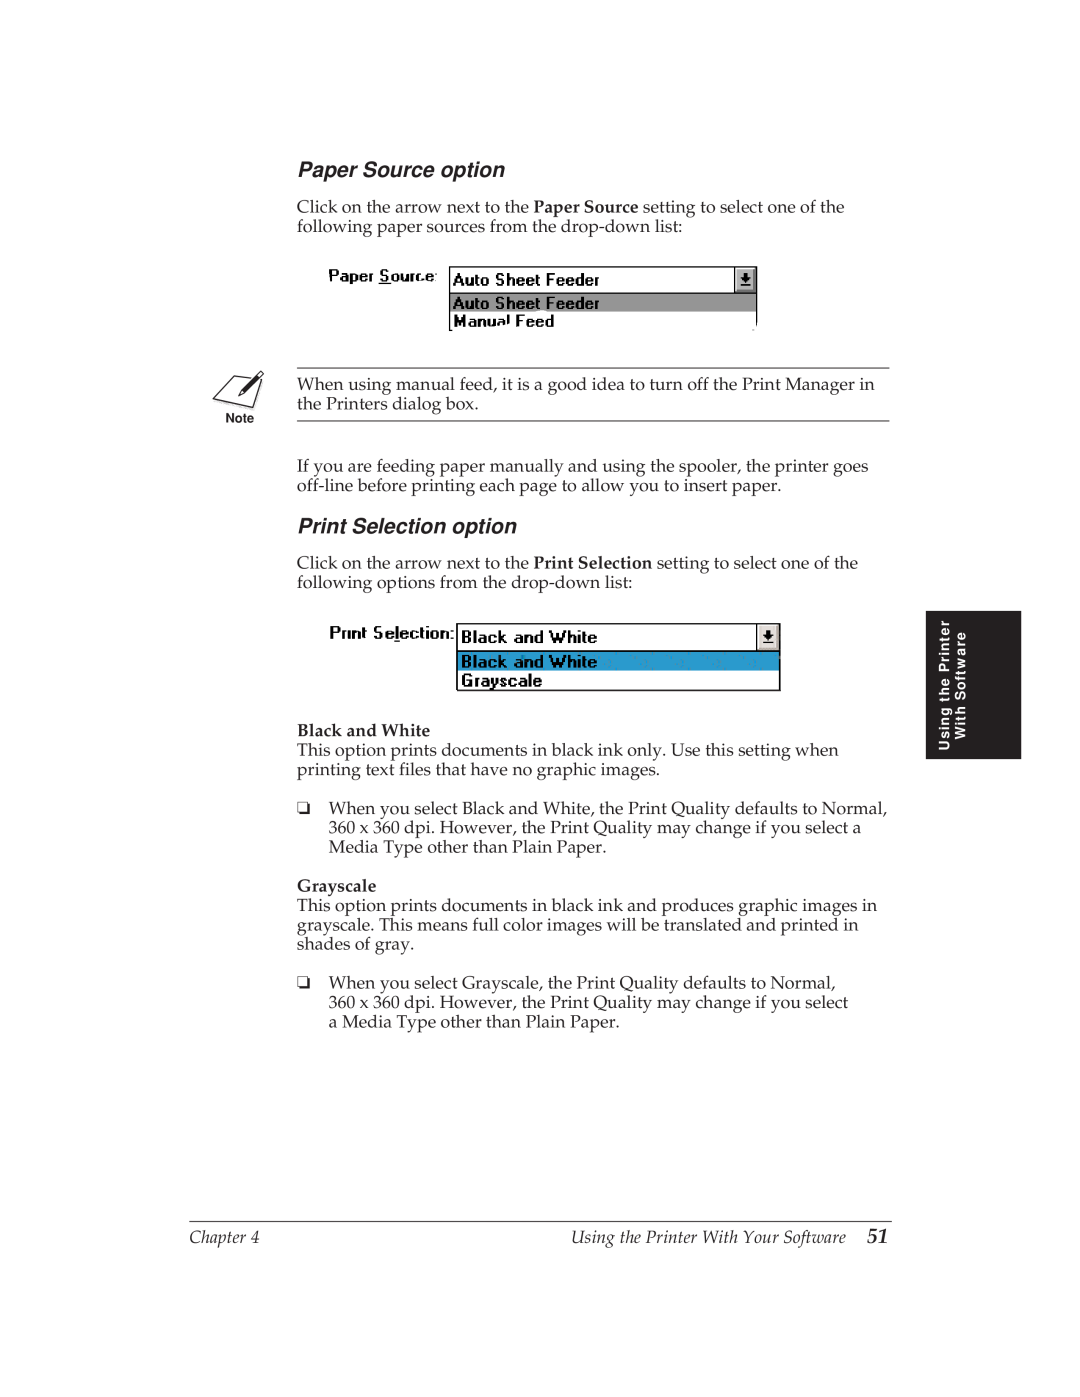 Canon BJ-30 manual Paper Source option, Print Selection option, Black and White, Grayscale 